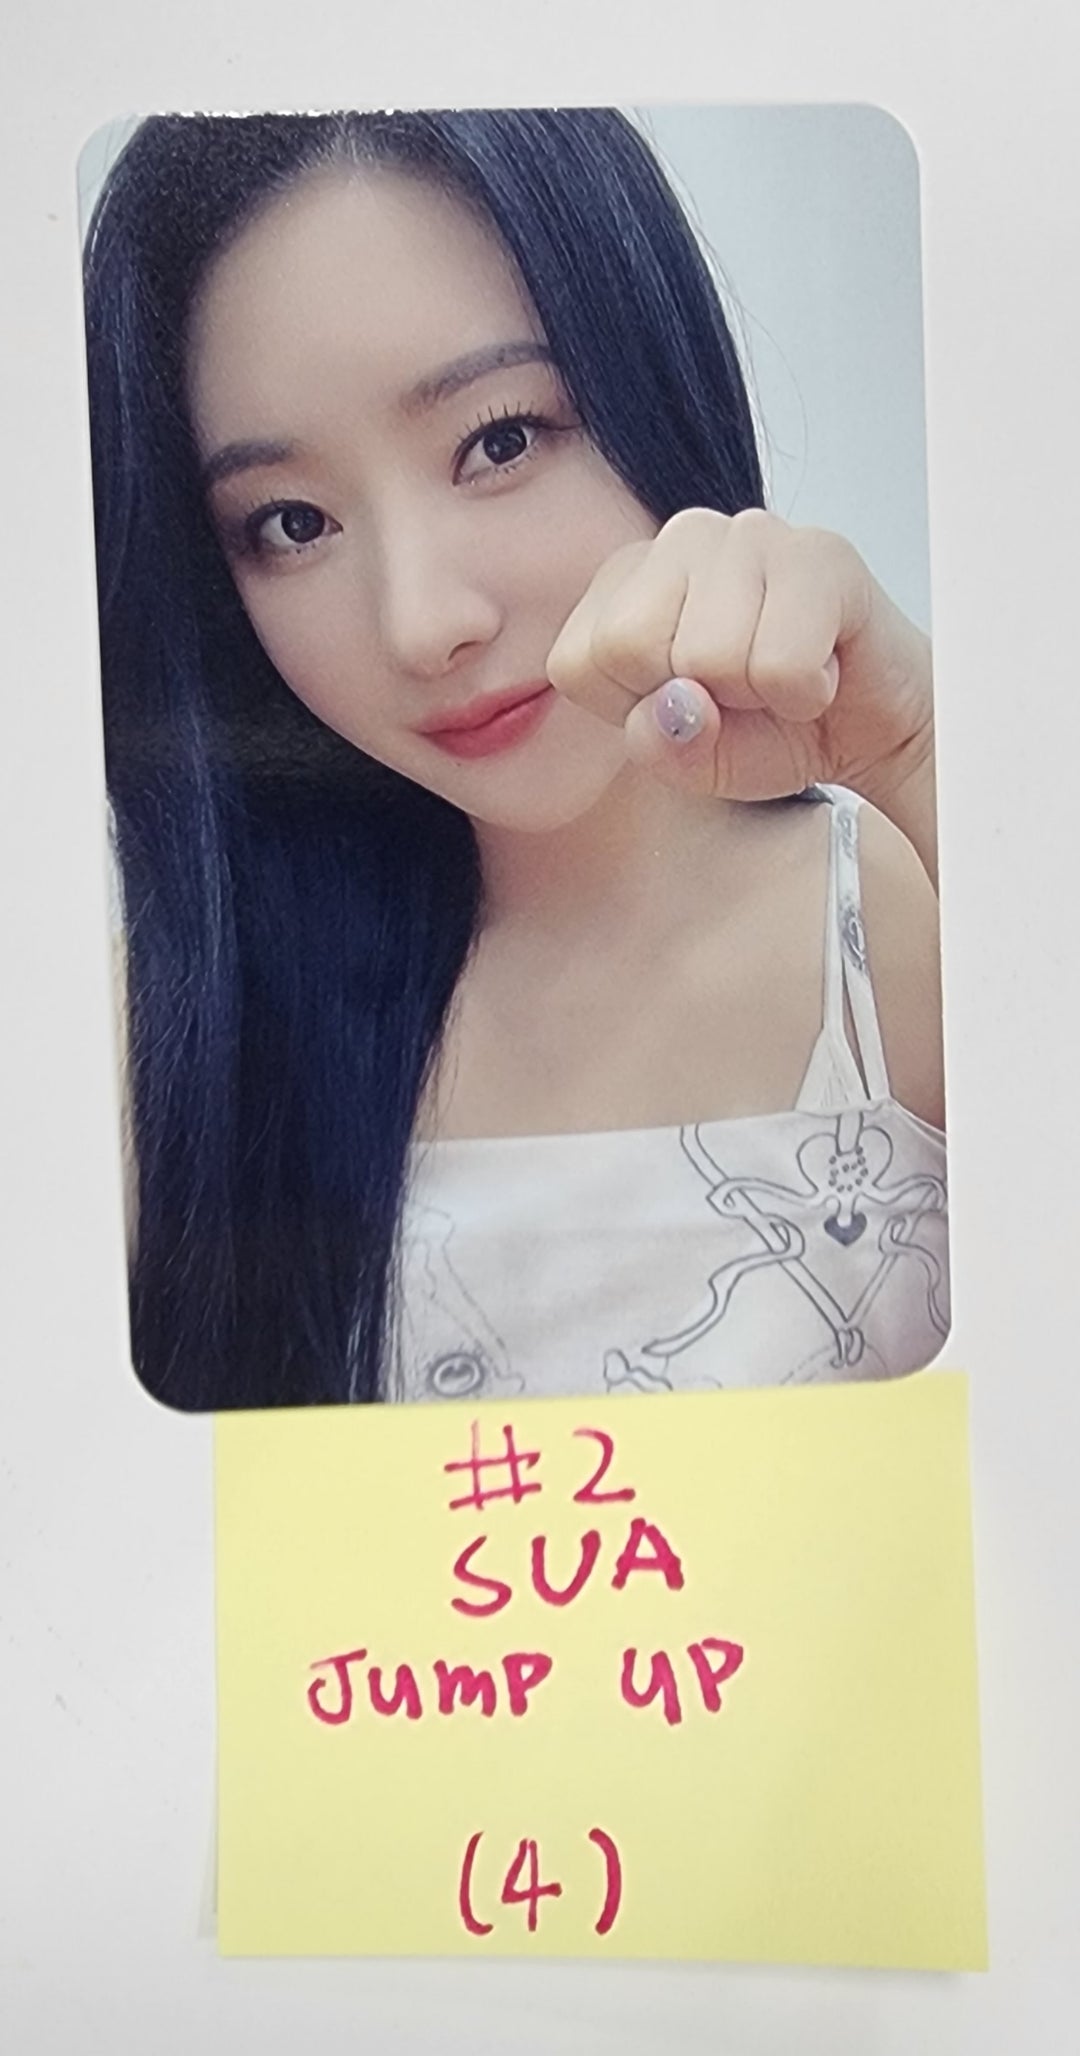 Dreamcatcher "Apocalypse : From us" - Jump Up Fansign Event Photocard